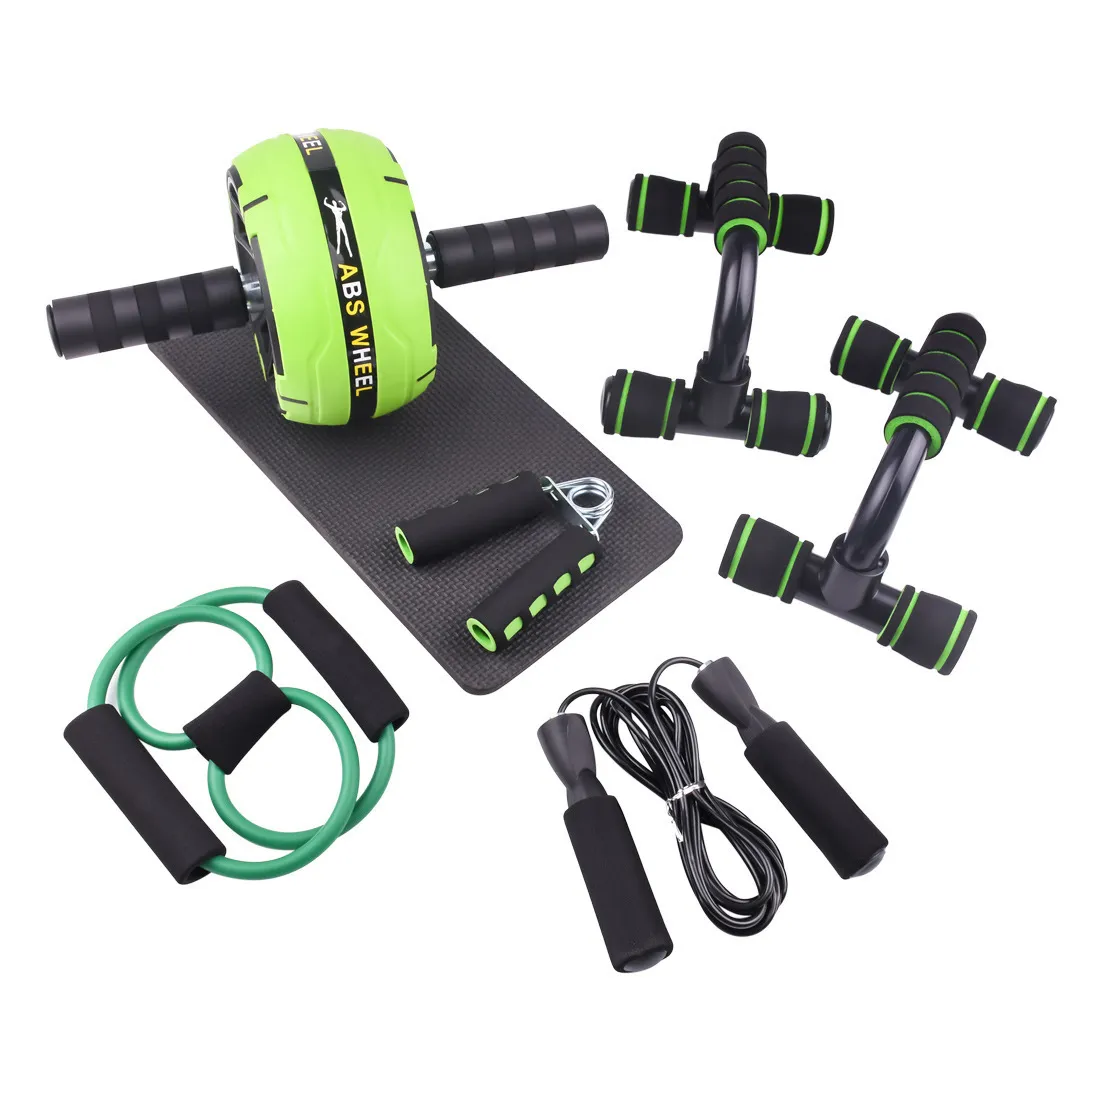 Core Abdominal Trainers 7 IN 1 AB Wheel Strength Training Ab Exercise Wheels Kit with Resistance Bands Push Up Bars Jump Rope Knee Mat Home 230617